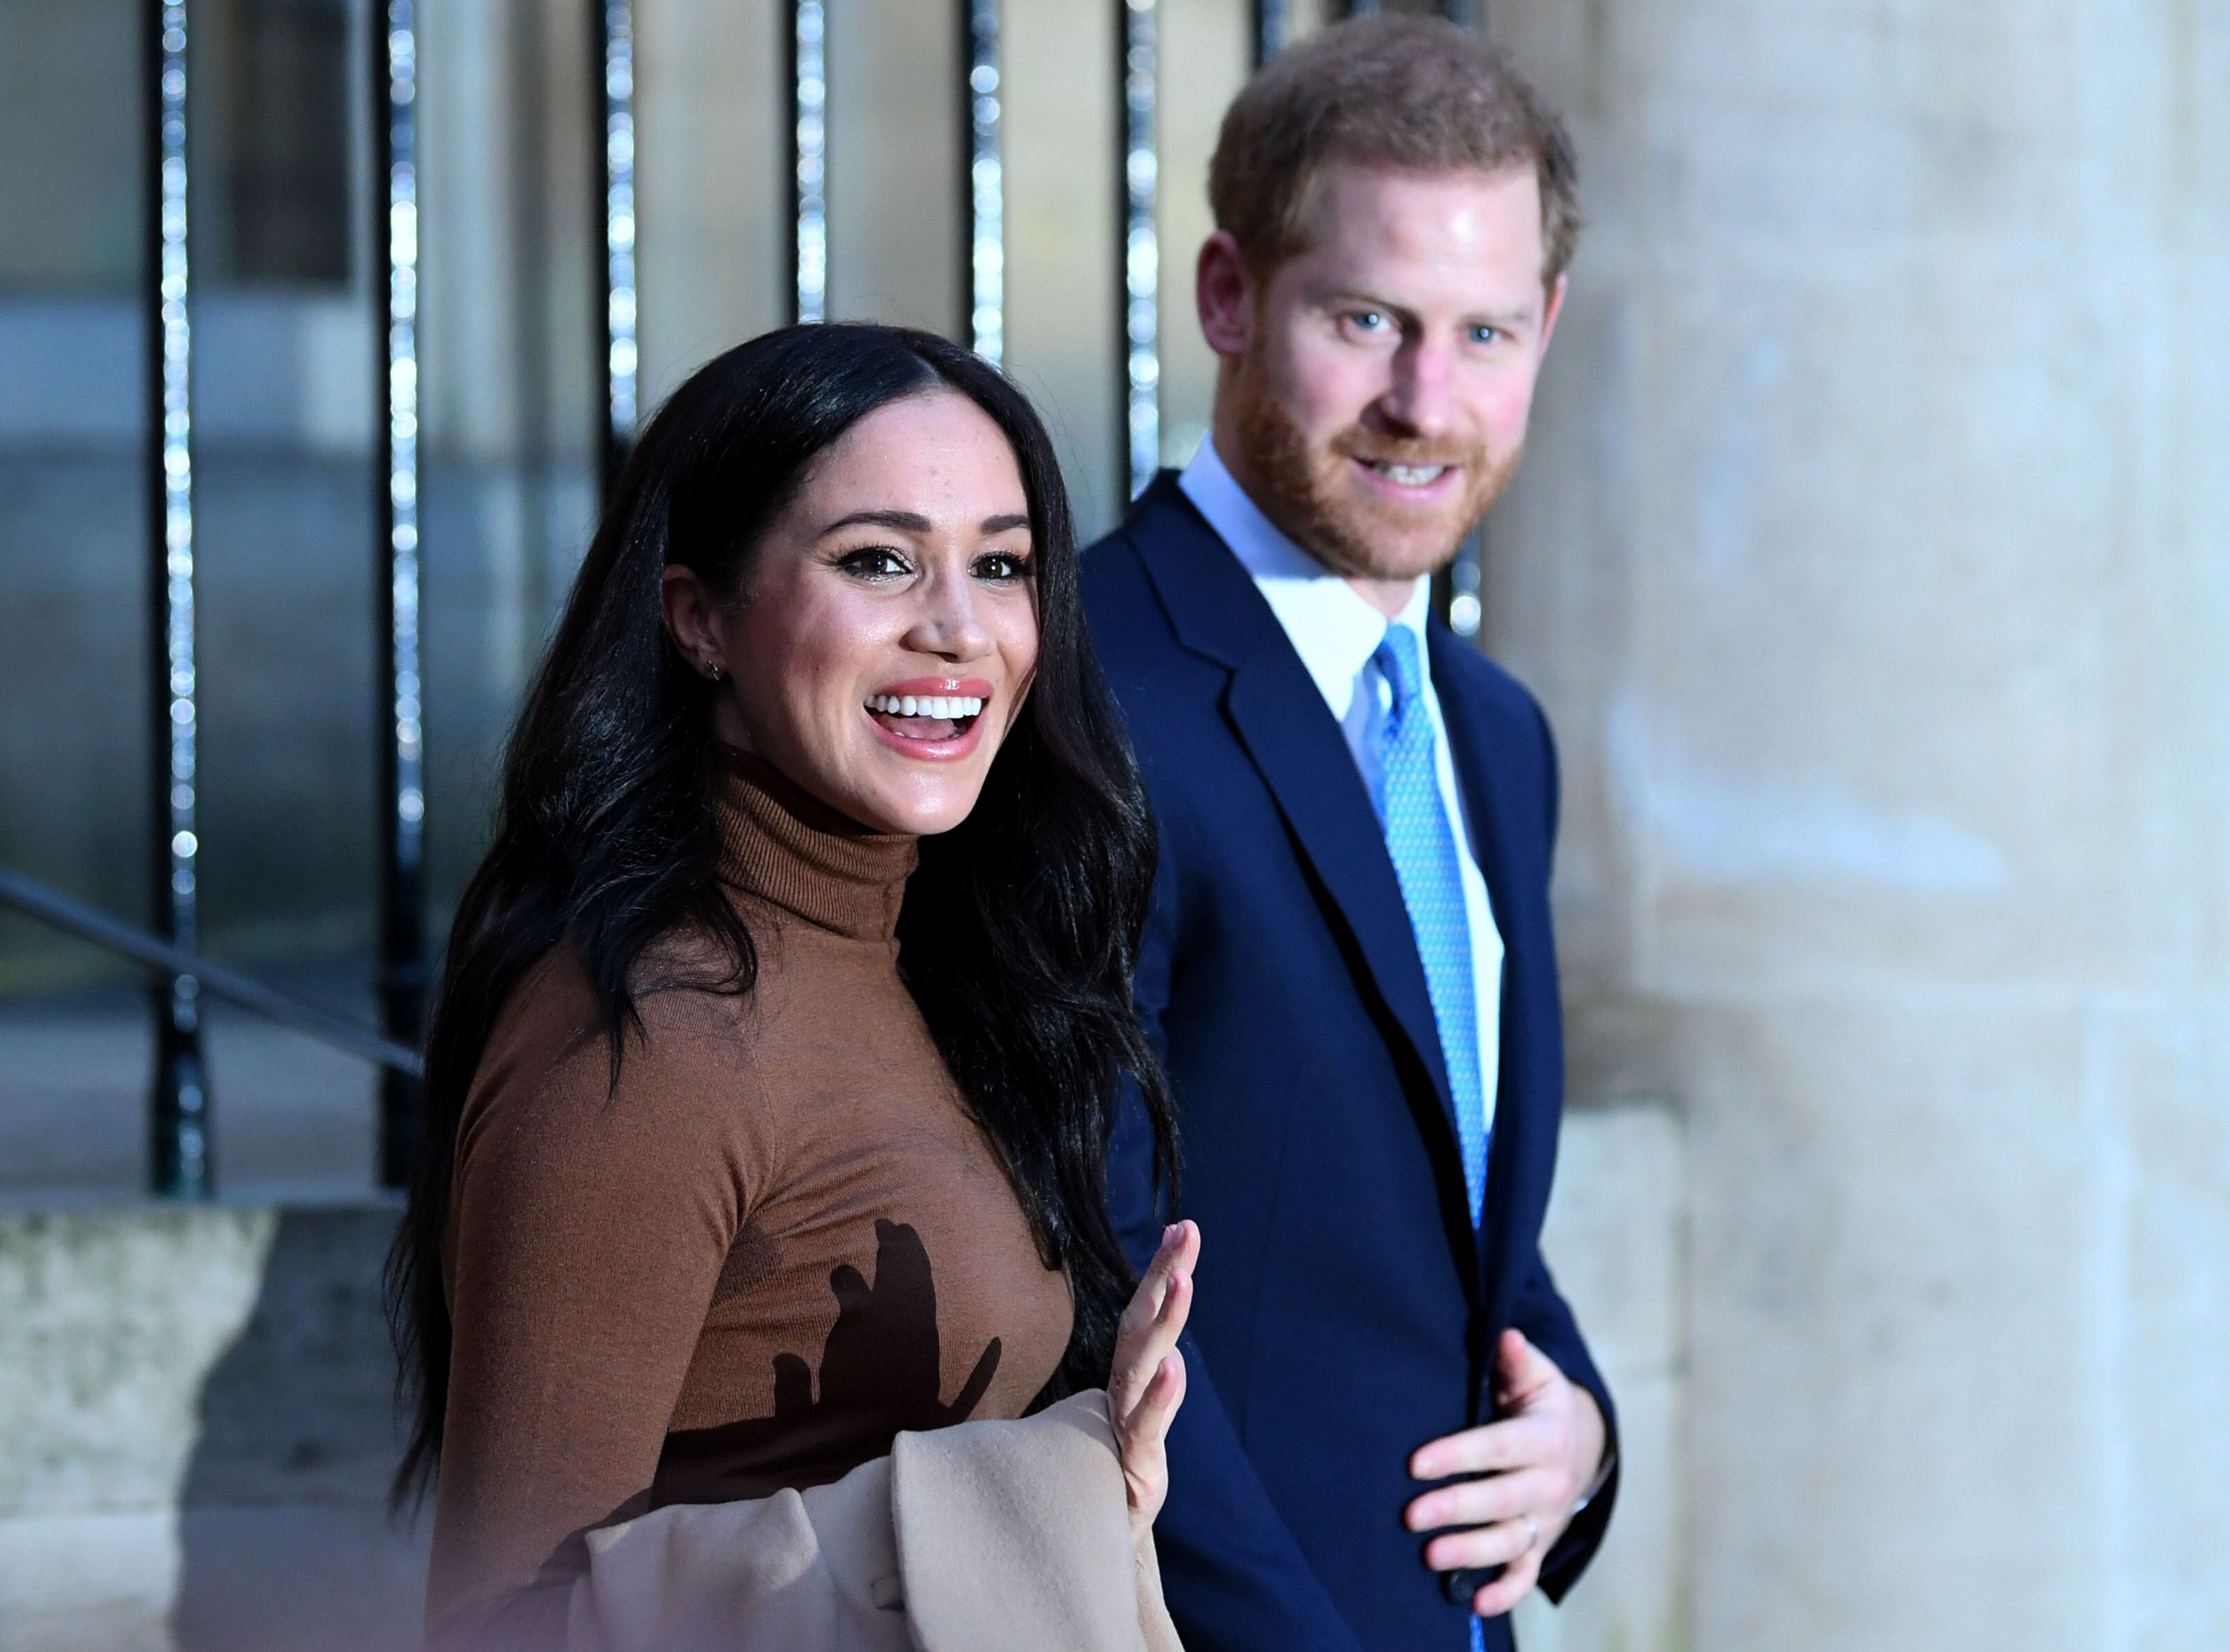 Prince Harry and Meghan react after their visit to Canada House in thanks for the warm Canadian hospitality and support they received during their recent stay in Canada, on January 7, 2020 in London, England | Photo: Getty Images 